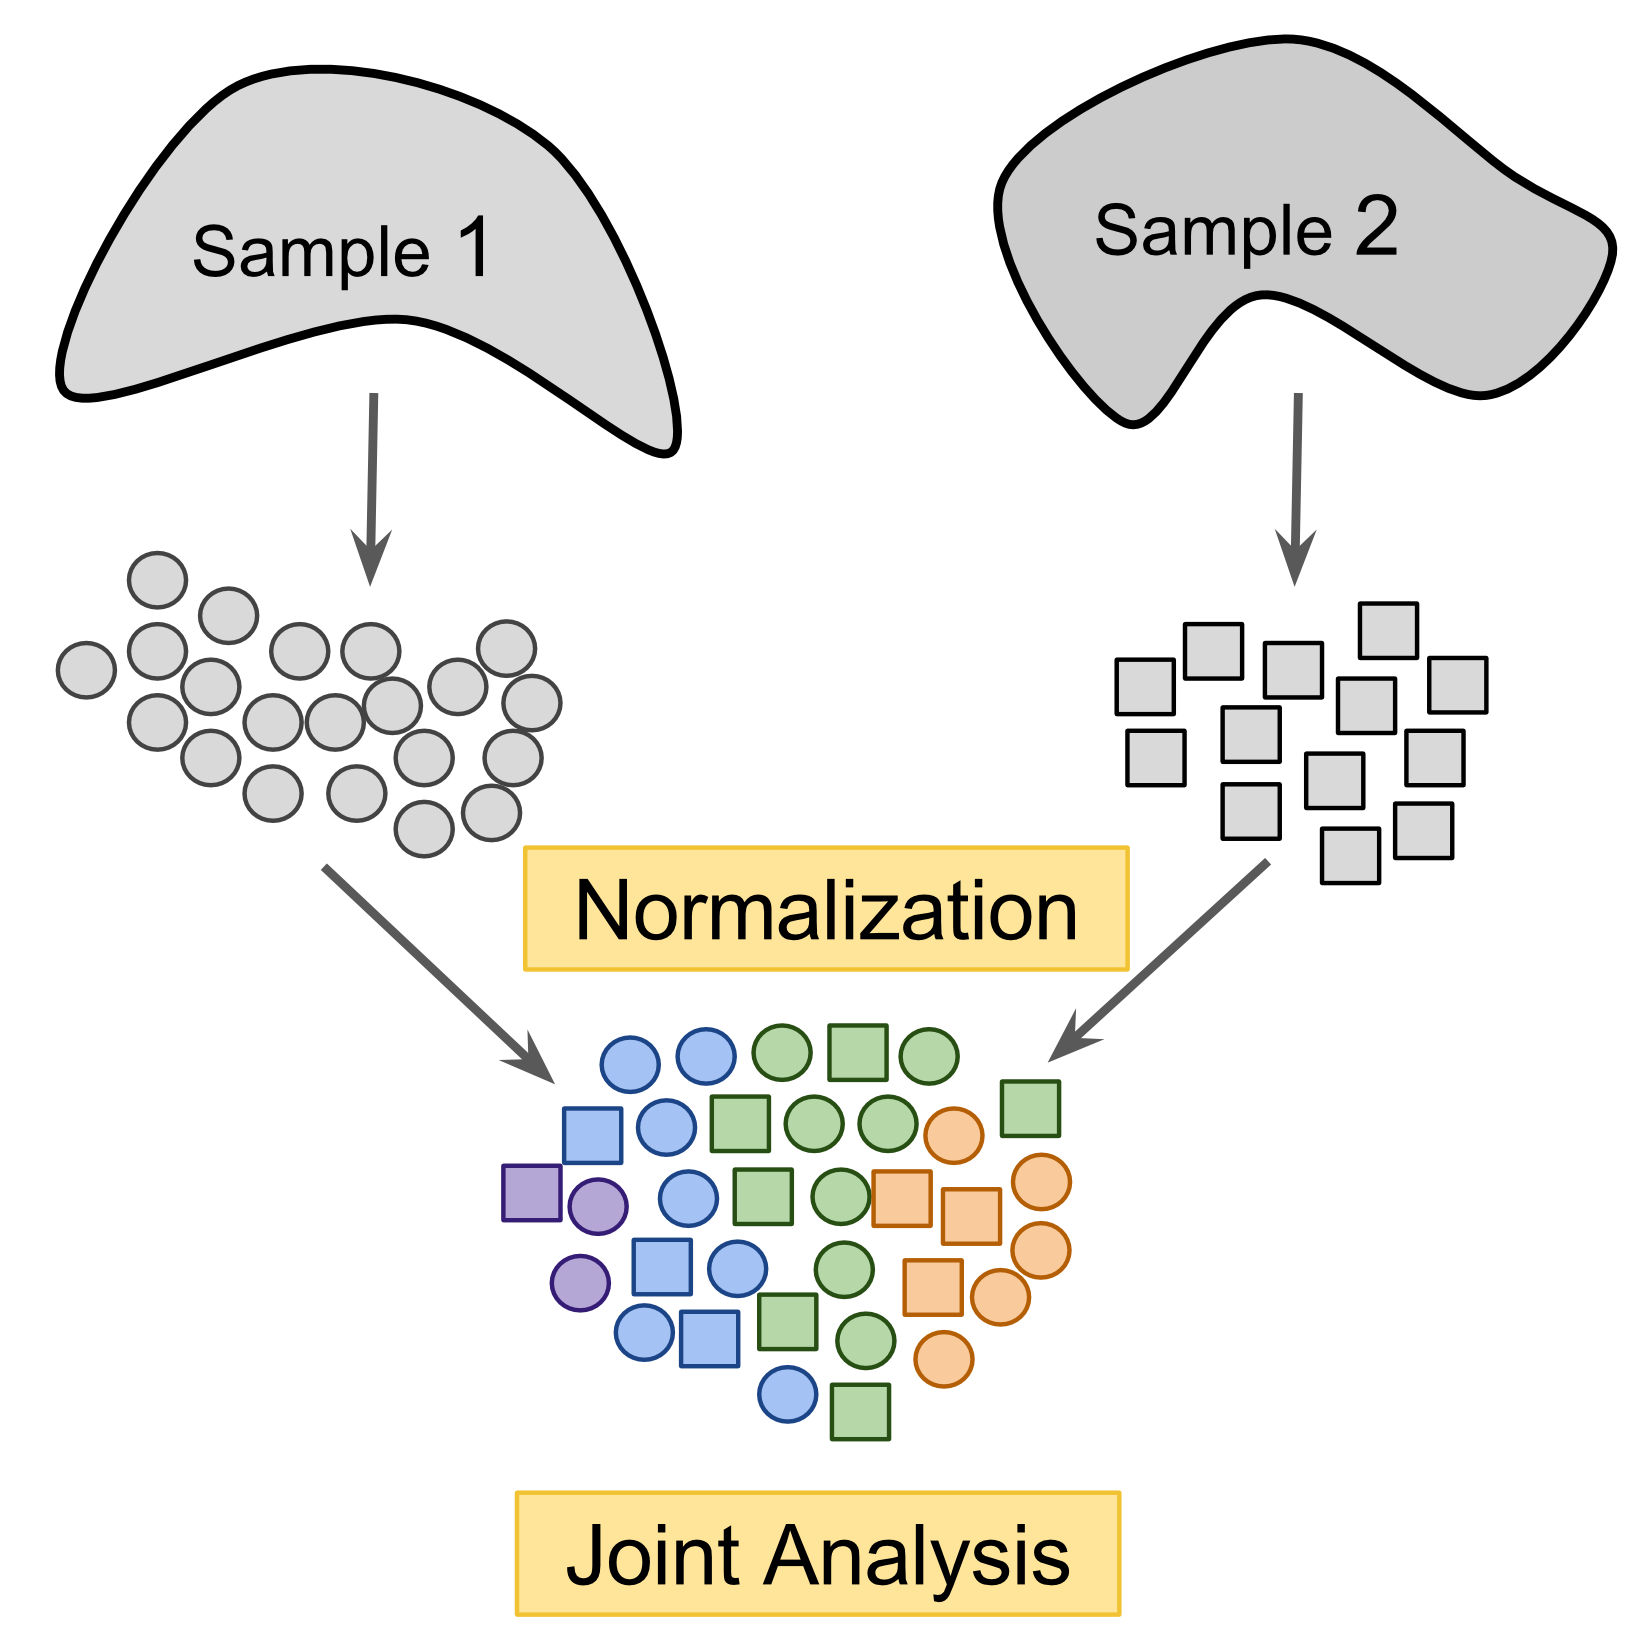 Cross-dataset normalization enables joint-analysis of 2+ scRNASeq datasets.